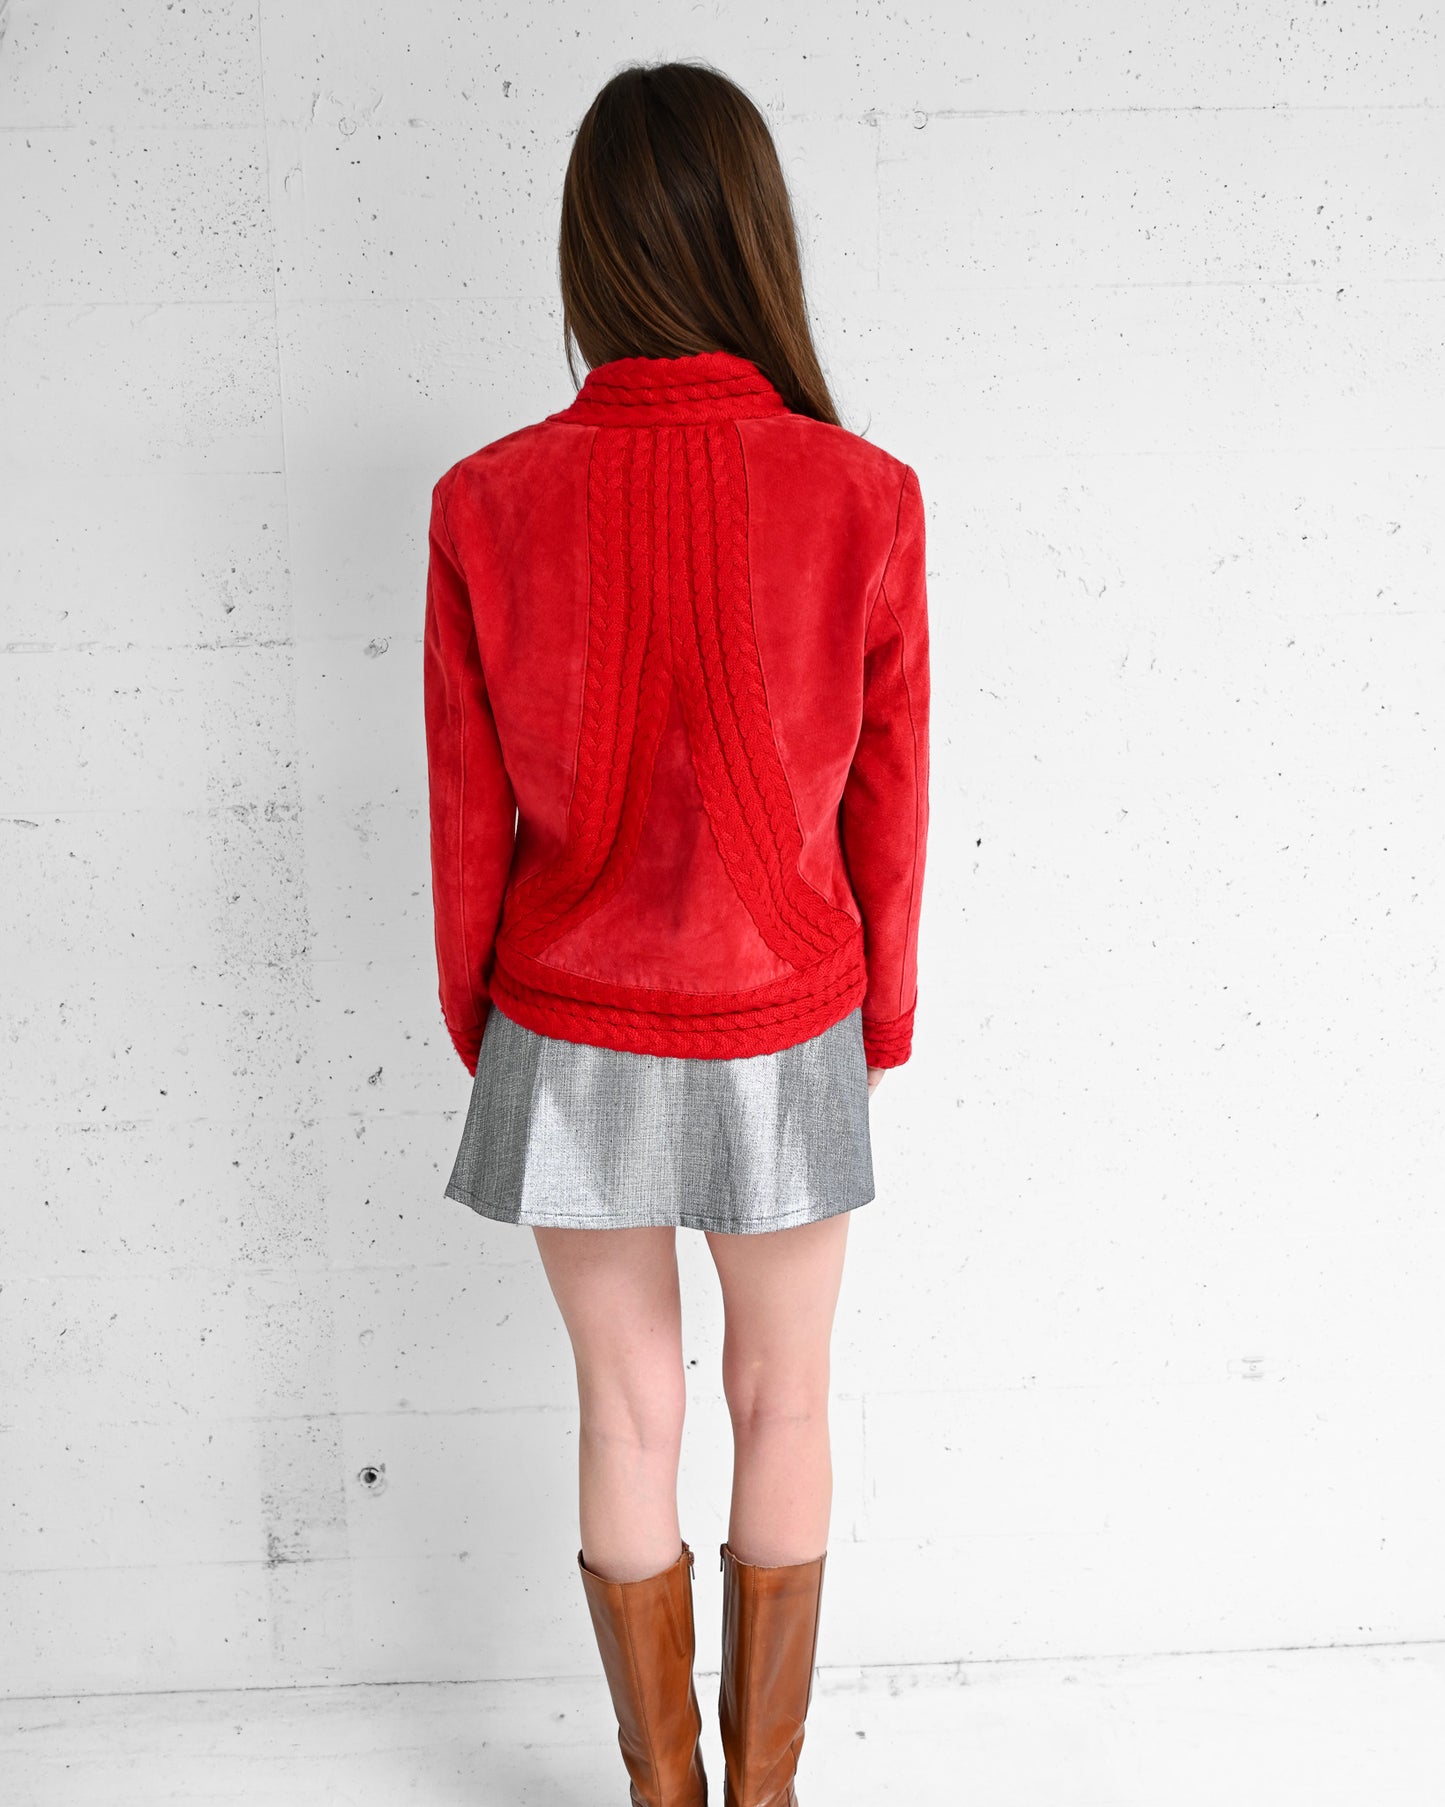 Red Paneled Suede Knit Jacket (M)